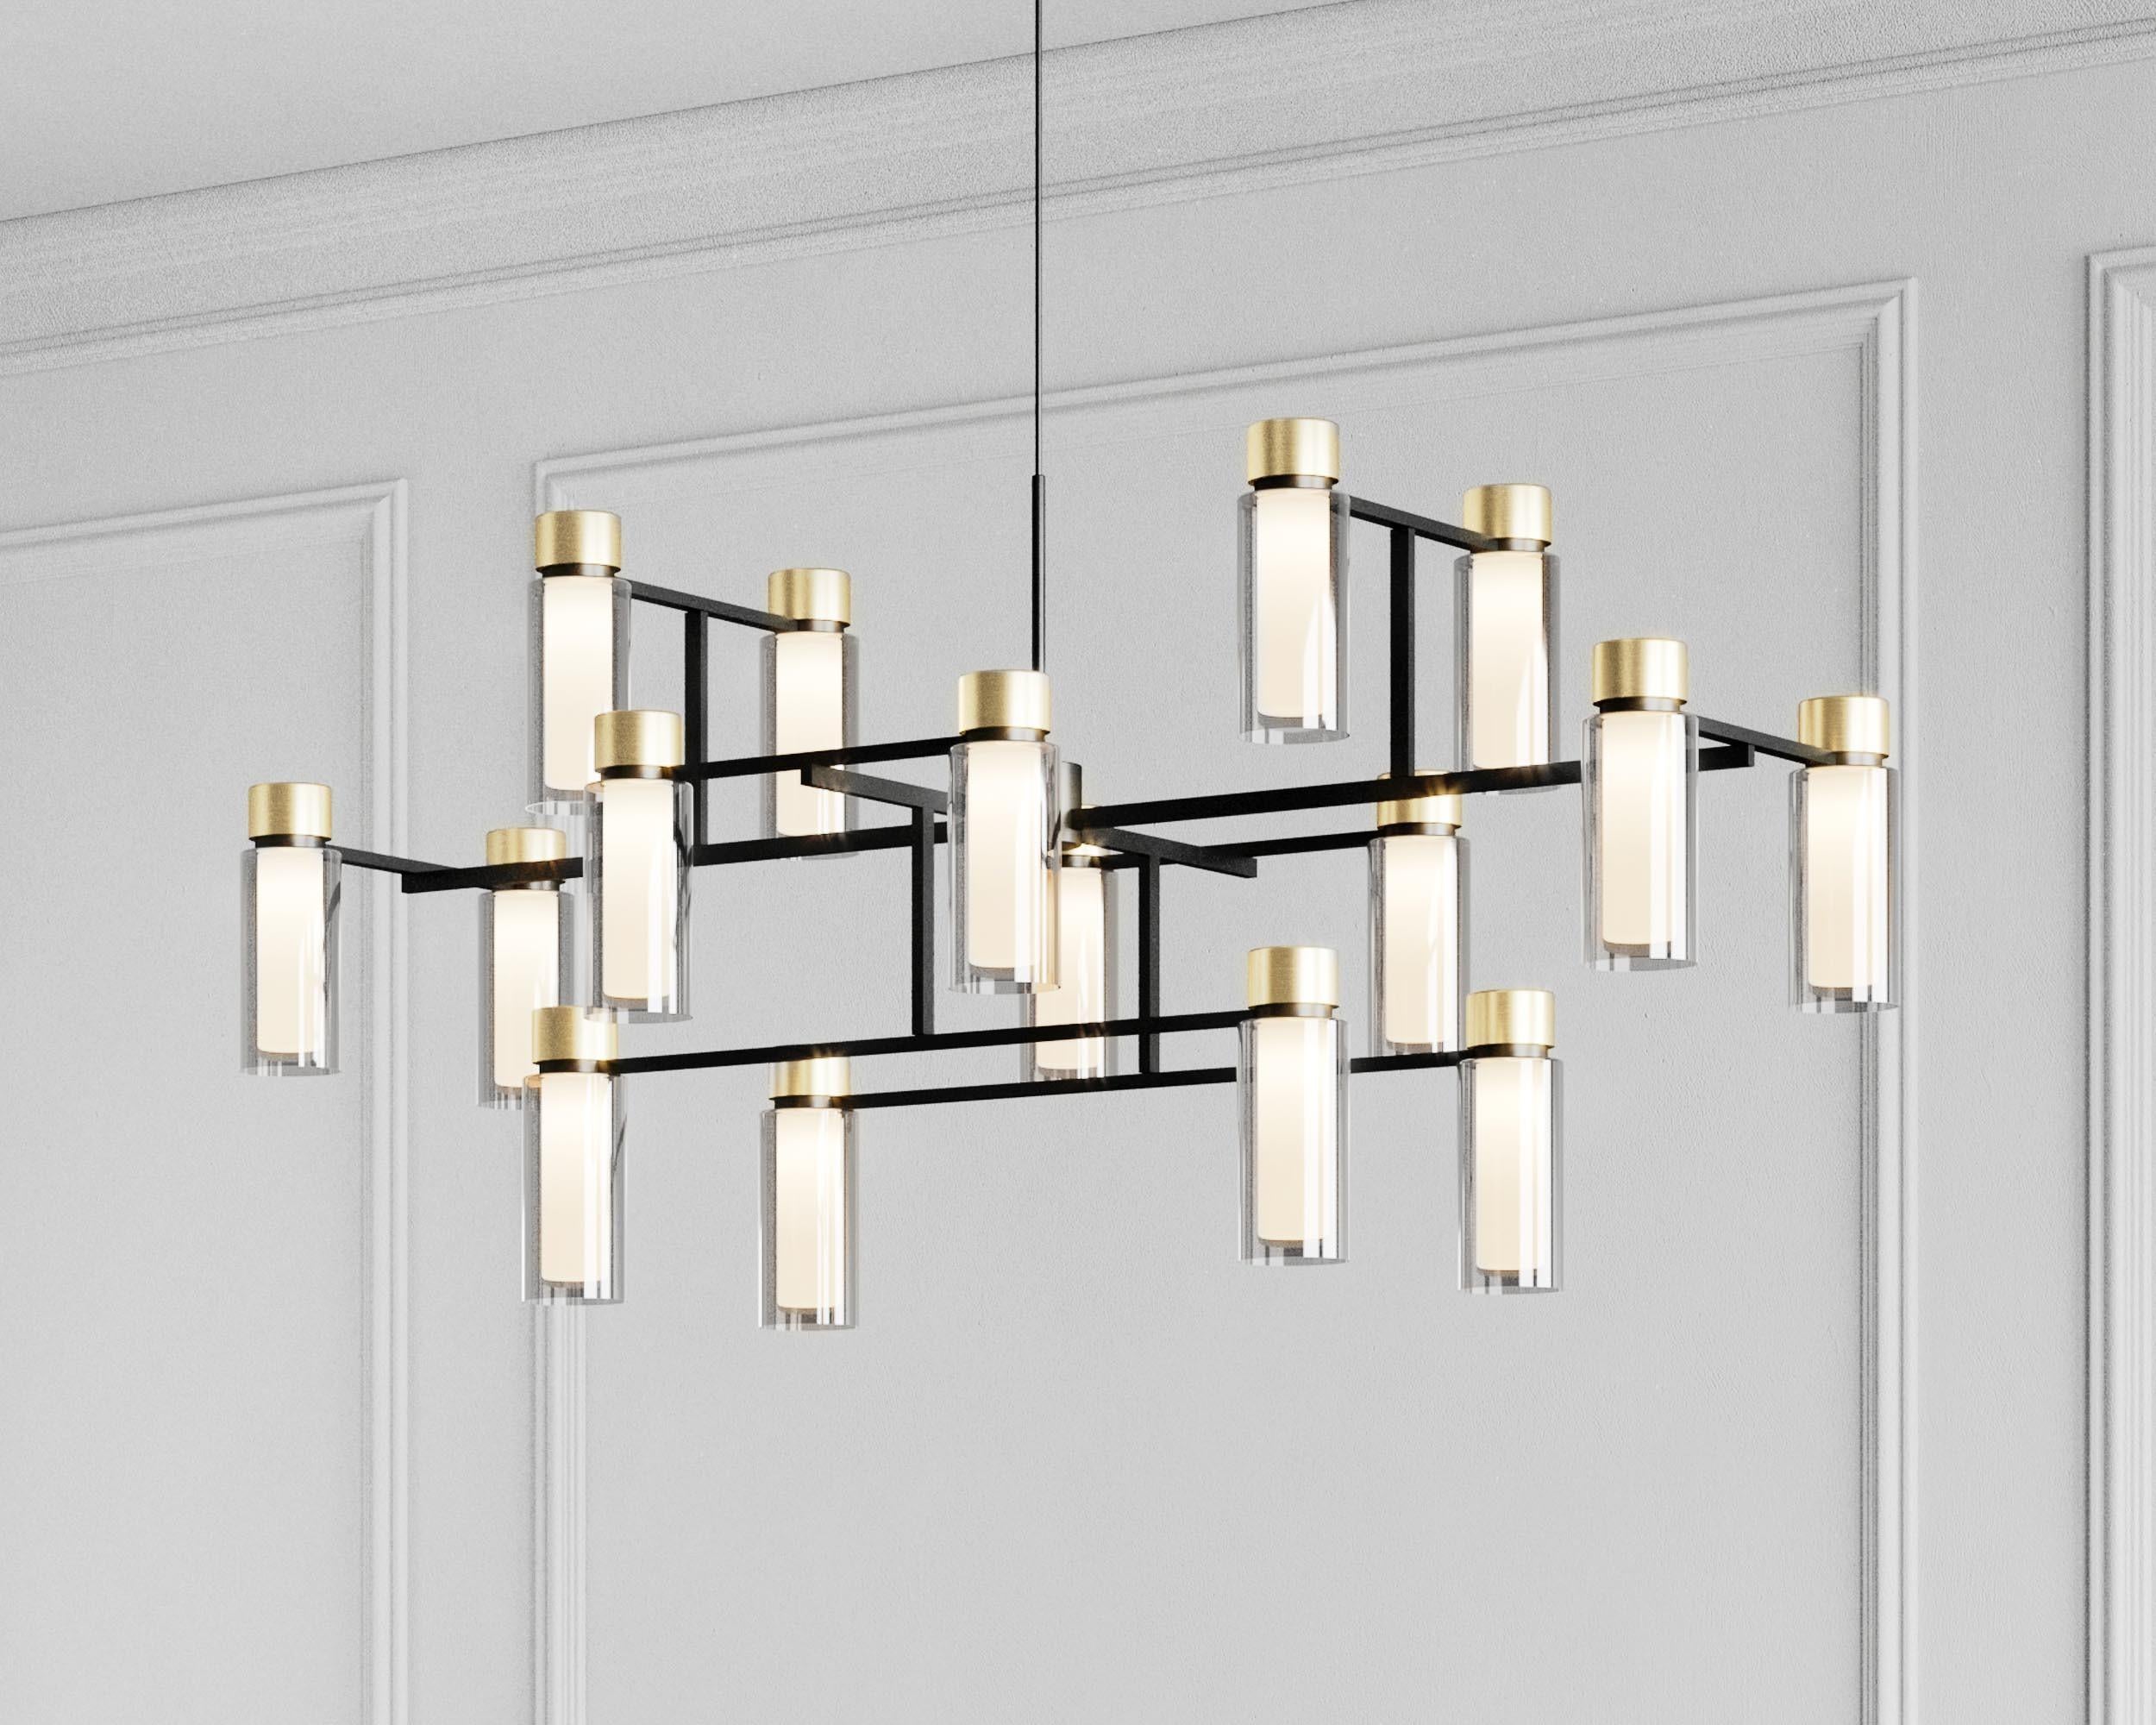 Chandelier Osman 560.12 by Corrado Dotti x TOOY
12 Lights

Model shown:
Finish: Brushed brass
Color: Clear glass

Lighting source : 12 x E14 220/240V compliant with US electric system

Pendant: Cable length 60 / 90 cm. 

50s Inspired collection of